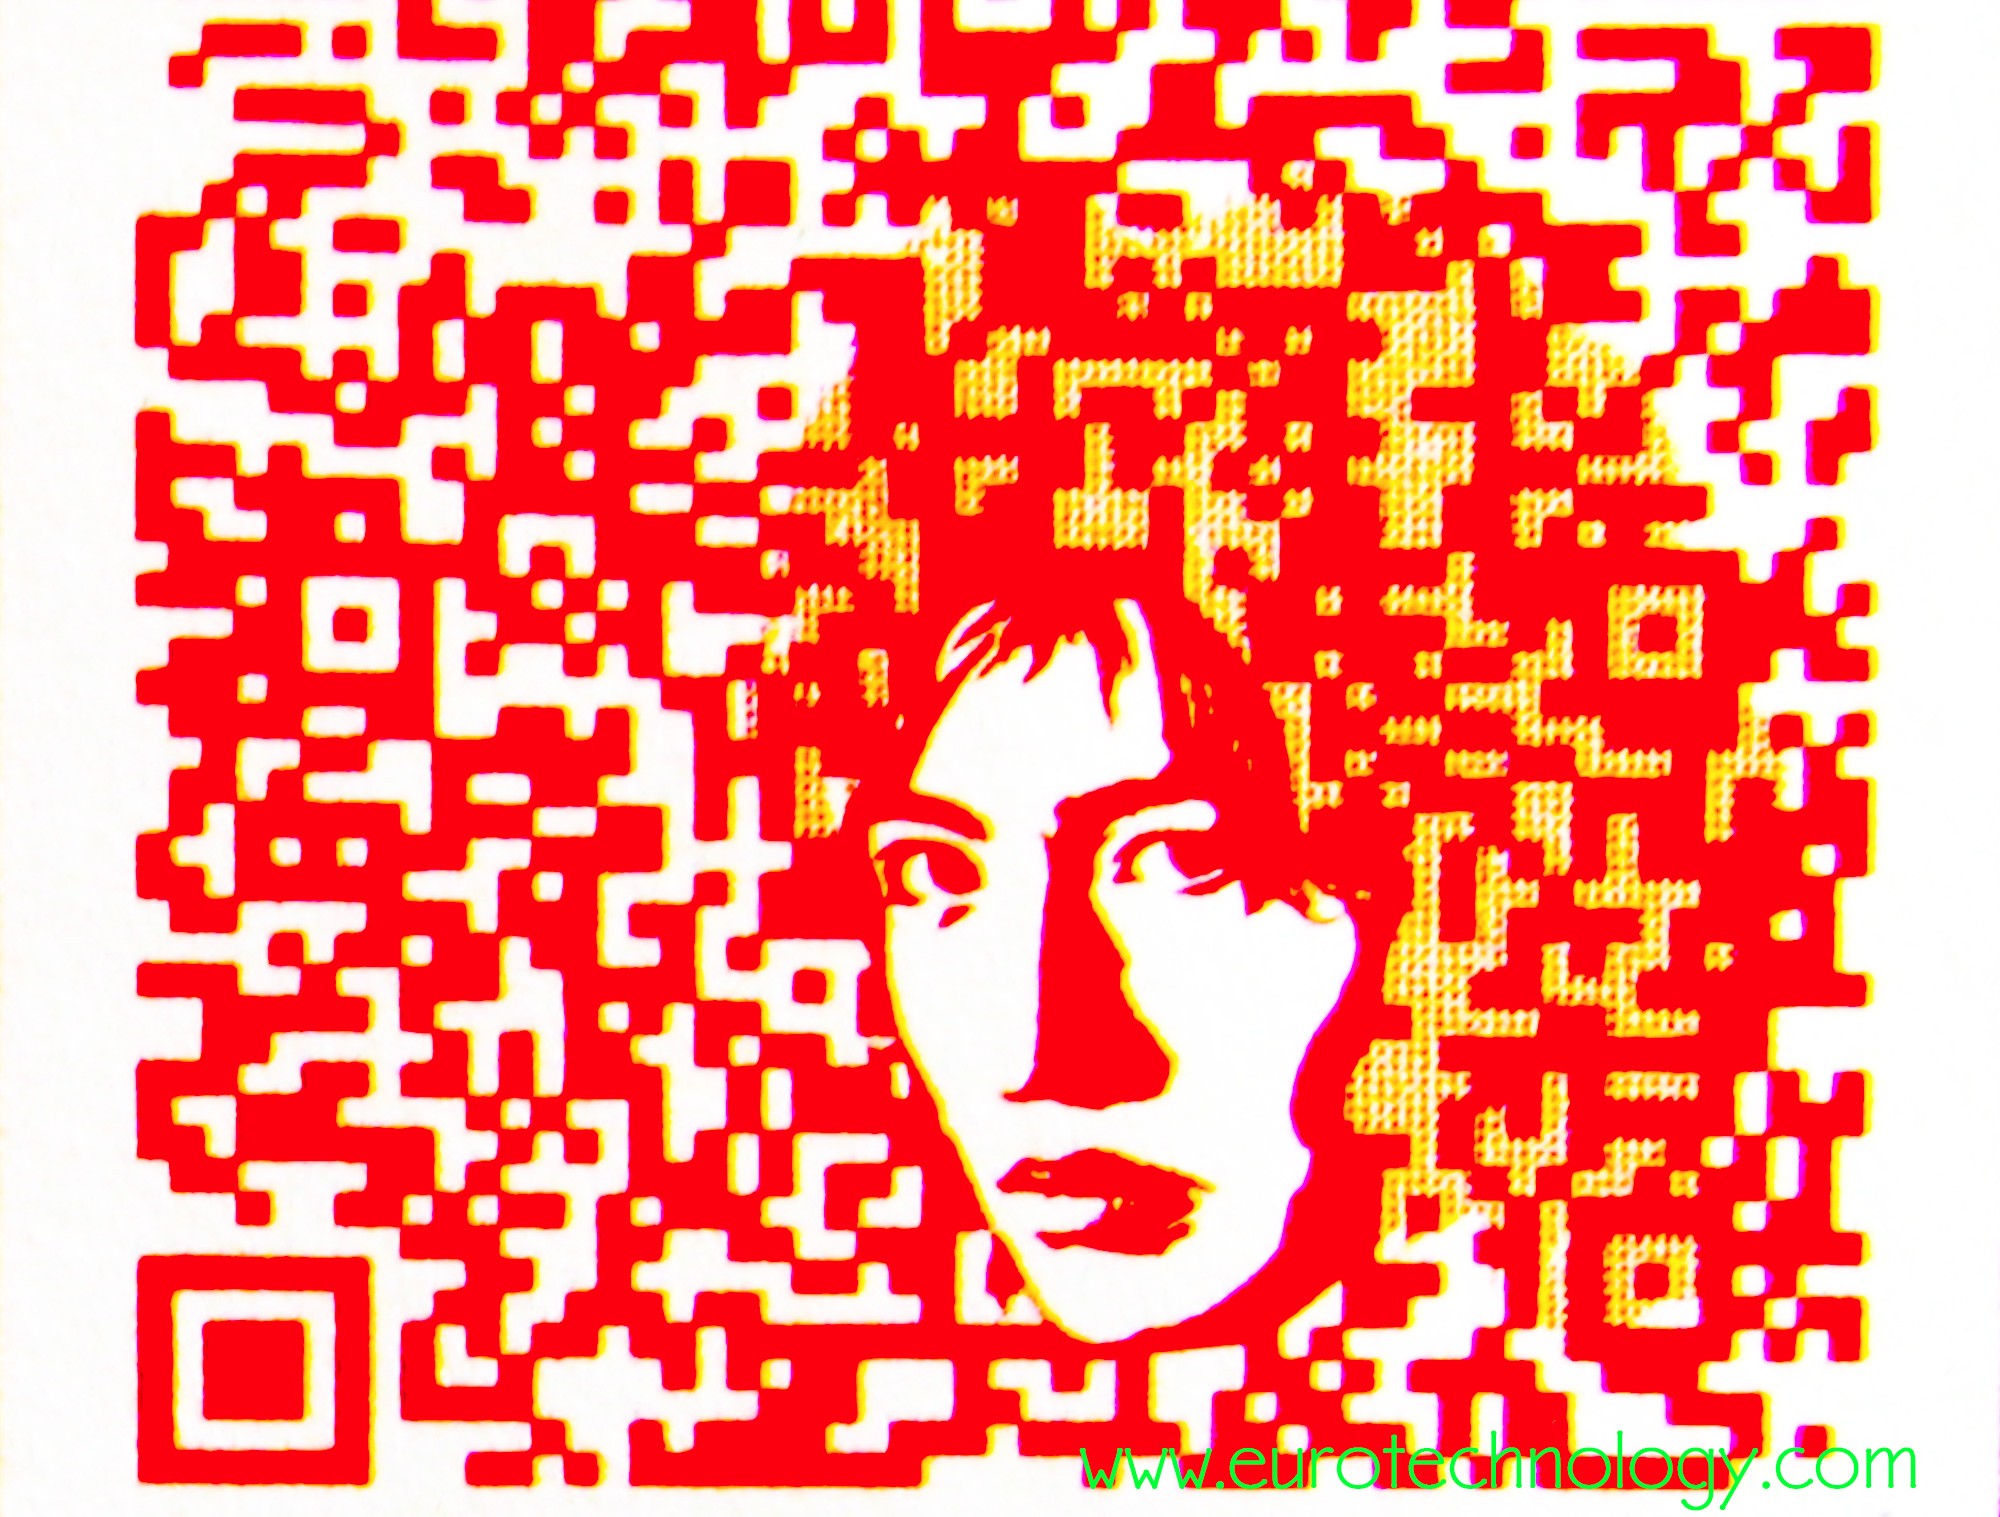 Customized QR code using in-built redundancy to display color and embedded graphics